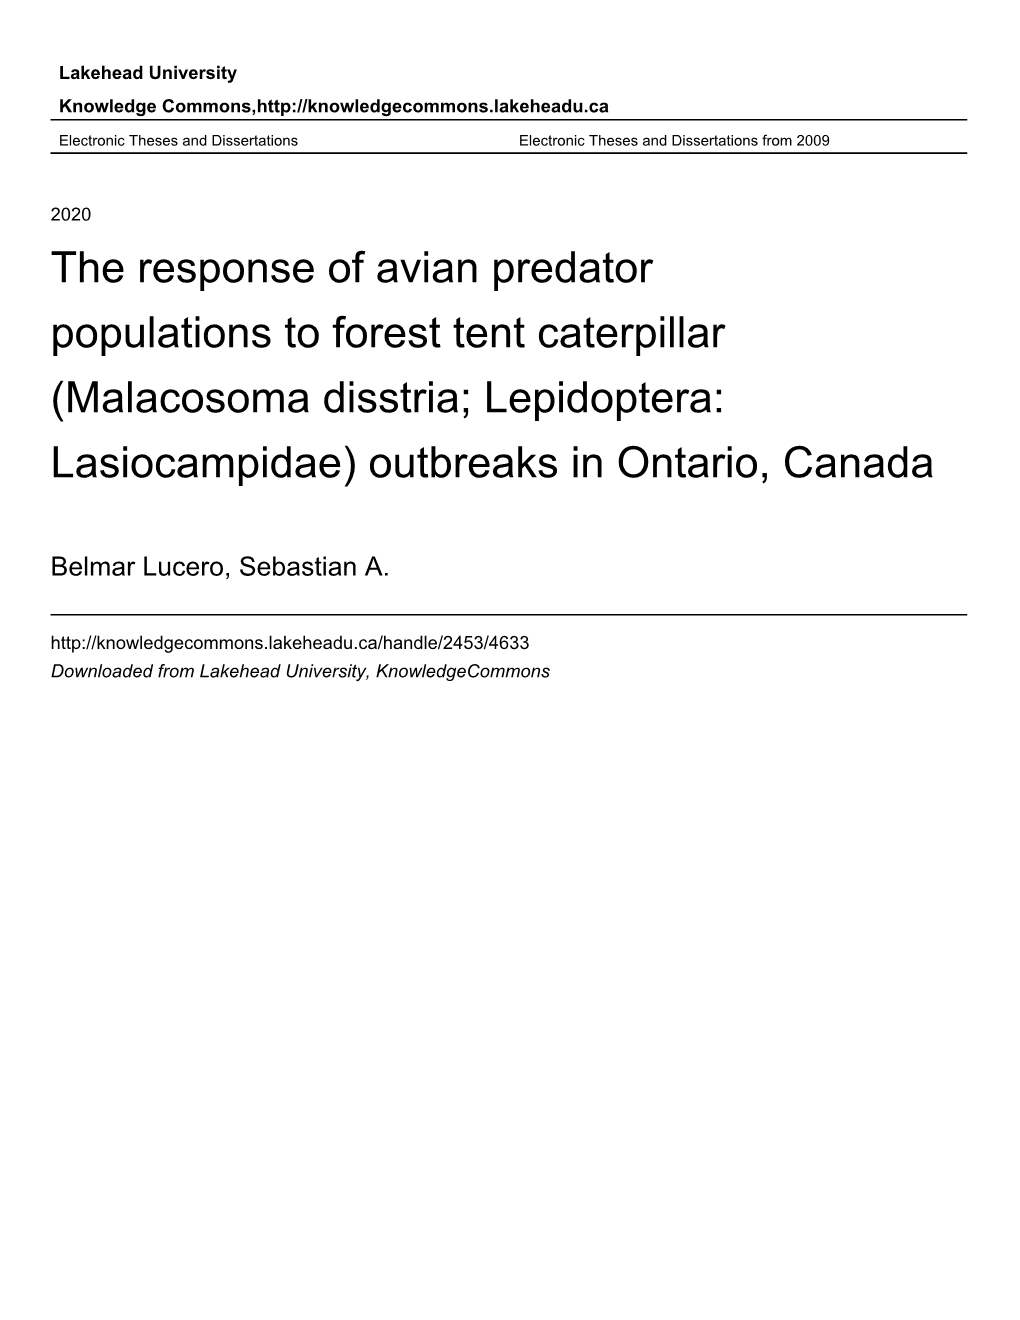 The Response of Avian Predator Populations to Forest Tent Caterpillar (Malacosoma Disstria; Lepidoptera: Lasiocampidae) Outbreaks in Ontario, Canada